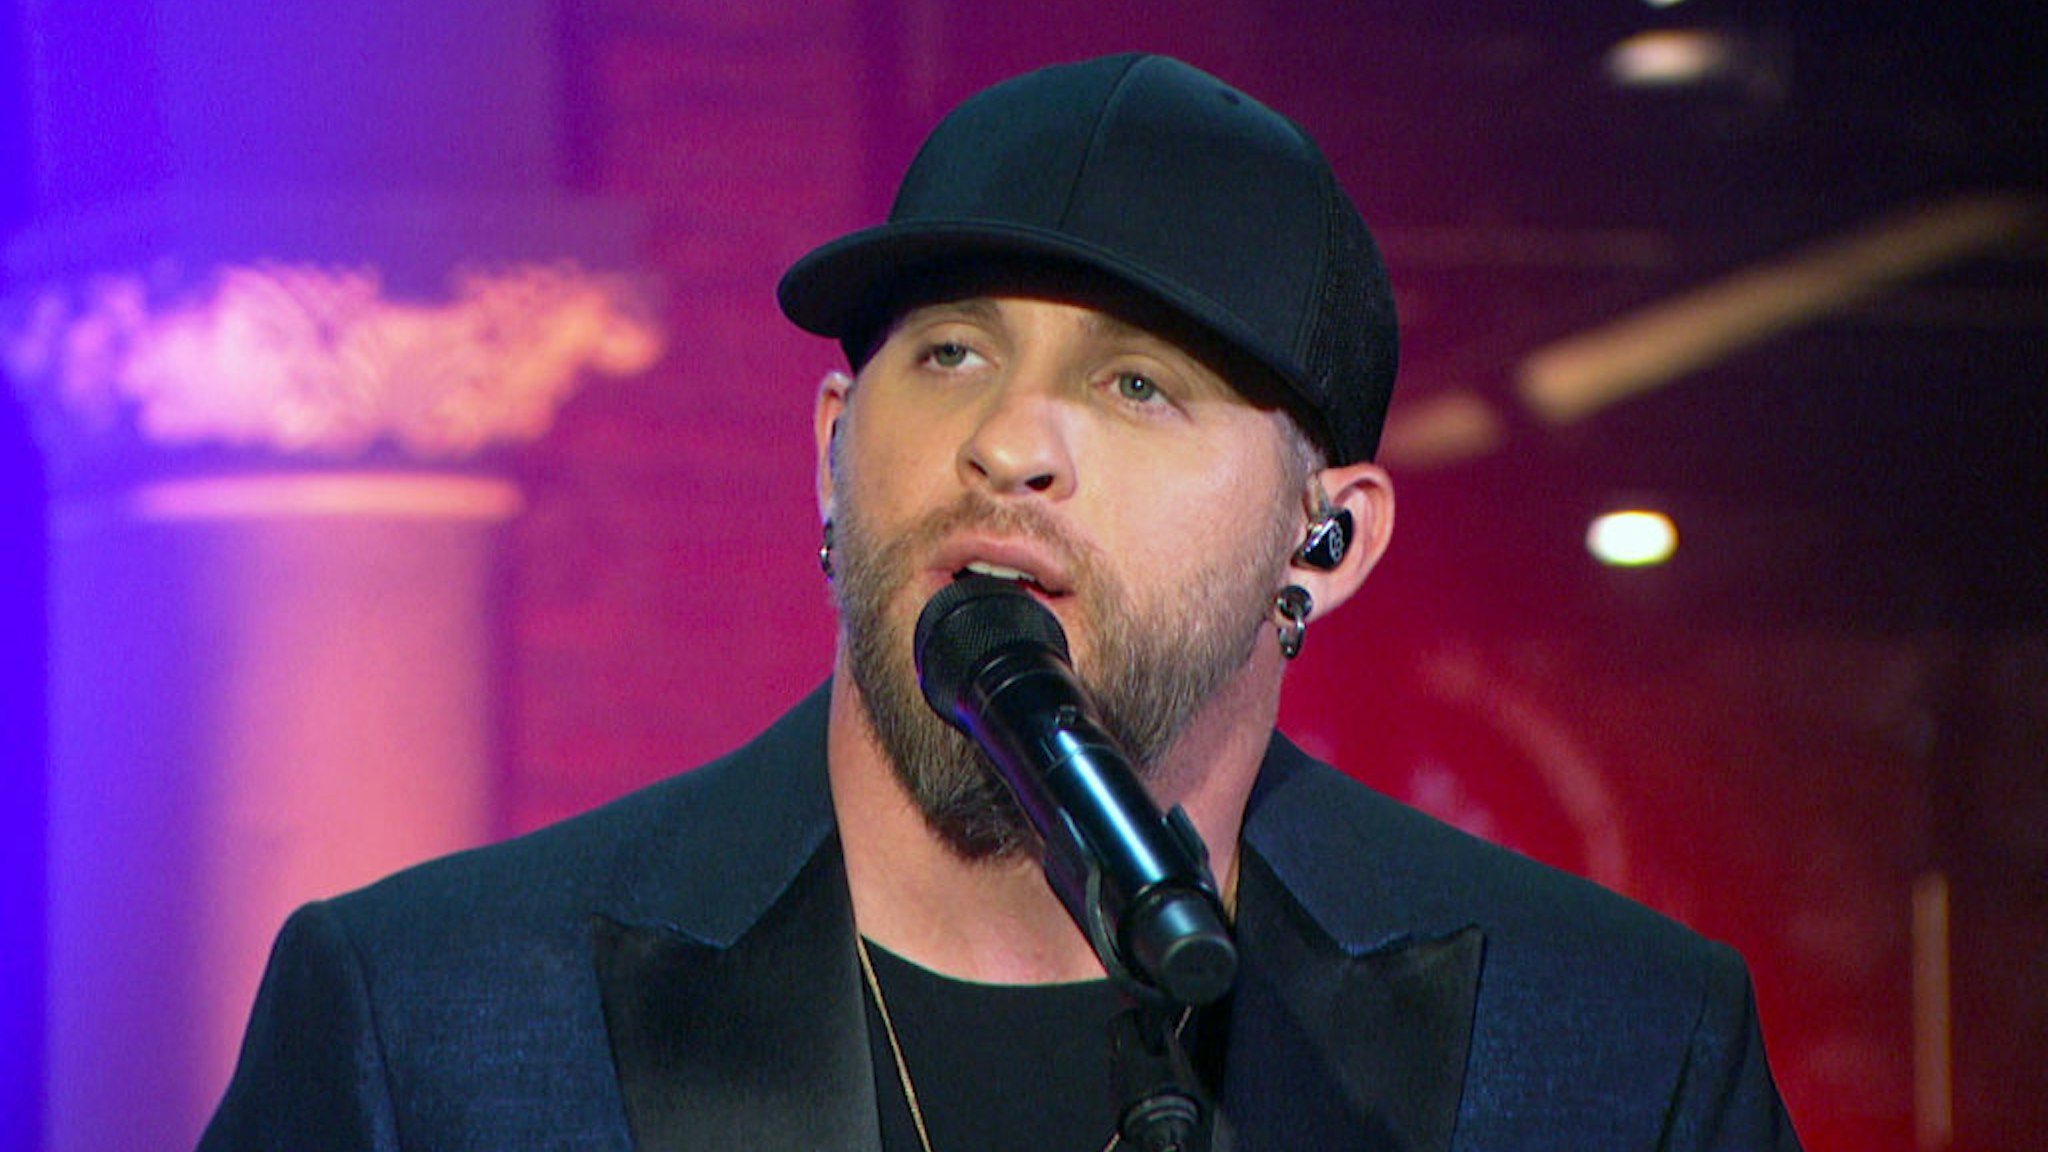 In this screengrab, Brantley Gilbert perform for the 40th Anniversary of “A Capitol Fourth” on PBS on July 04, 2020 in Washington, DC.